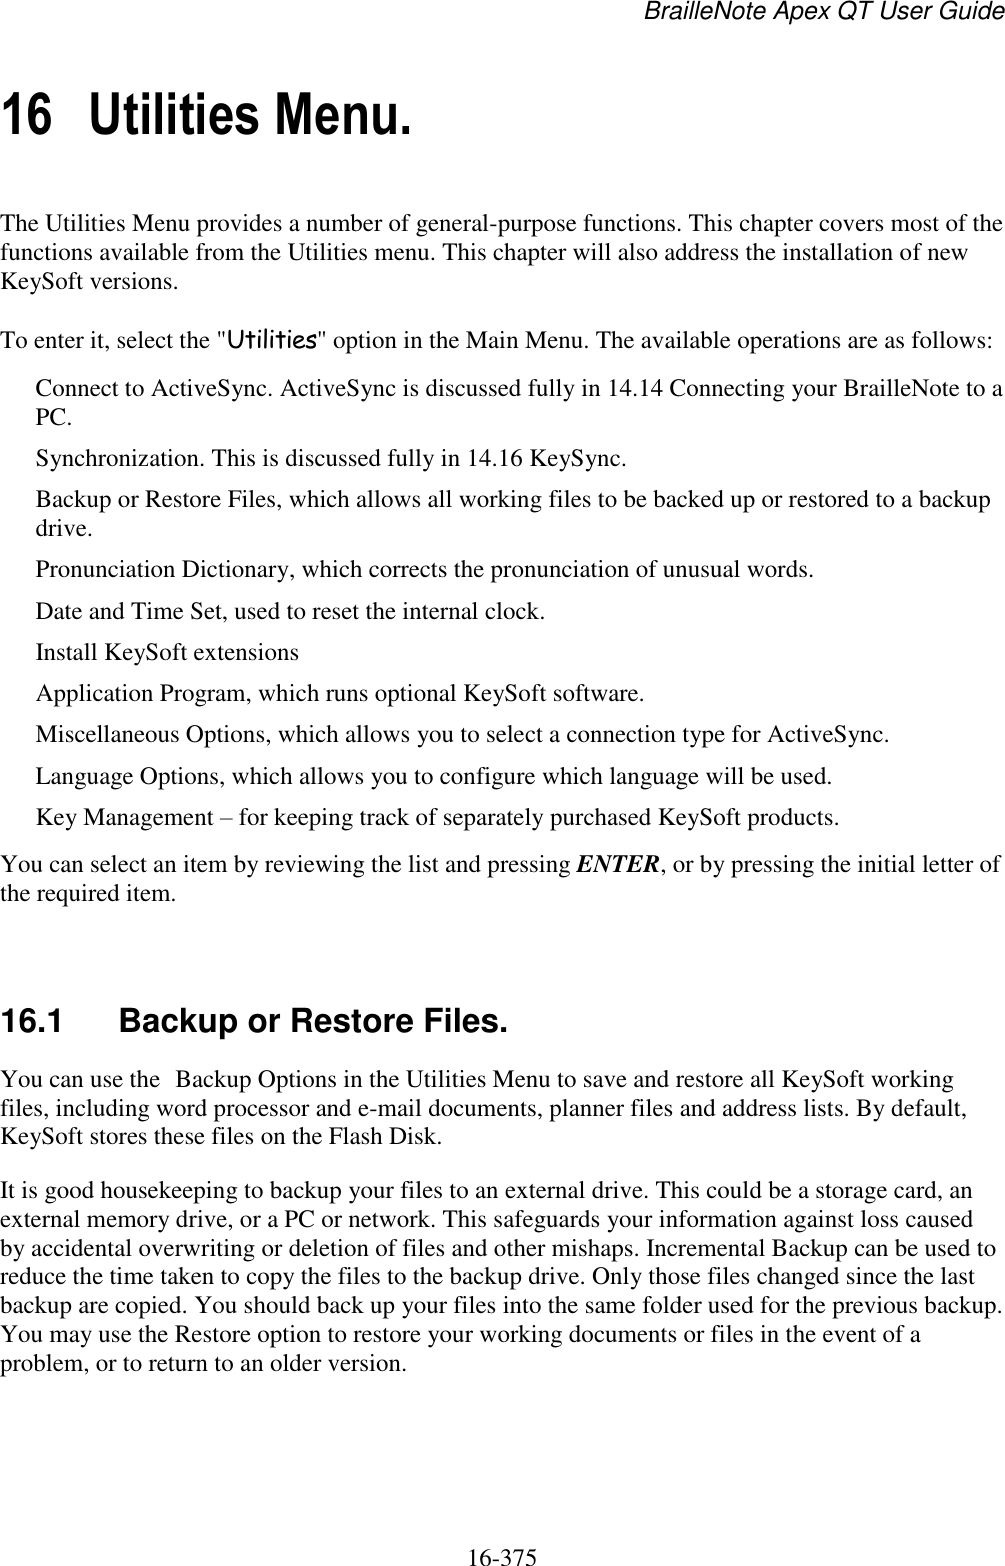 BrailleNote Apex QT User Guide  16-375   16 Utilities Menu. The Utilities Menu provides a number of general-purpose functions. This chapter covers most of the functions available from the Utilities menu. This chapter will also address the installation of new KeySoft versions. To enter it, select the &quot;Utilities&quot; option in the Main Menu. The available operations are as follows: Connect to ActiveSync. ActiveSync is discussed fully in 14.14 Connecting your BrailleNote to a PC. Synchronization. This is discussed fully in 14.16 KeySync. Backup or Restore Files, which allows all working files to be backed up or restored to a backup drive. Pronunciation Dictionary, which corrects the pronunciation of unusual words. Date and Time Set, used to reset the internal clock. Install KeySoft extensions Application Program, which runs optional KeySoft software. Miscellaneous Options, which allows you to select a connection type for ActiveSync. Language Options, which allows you to configure which language will be used.  Key Management – for keeping track of separately purchased KeySoft products. You can select an item by reviewing the list and pressing ENTER, or by pressing the initial letter of the required item.   16.1  Backup or Restore Files. You can use the Backup Options in the Utilities Menu to save and restore all KeySoft working files, including word processor and e-mail documents, planner files and address lists. By default, KeySoft stores these files on the Flash Disk. It is good housekeeping to backup your files to an external drive. This could be a storage card, an external memory drive, or a PC or network. This safeguards your information against loss caused by accidental overwriting or deletion of files and other mishaps. Incremental Backup can be used to reduce the time taken to copy the files to the backup drive. Only those files changed since the last backup are copied. You should back up your files into the same folder used for the previous backup. You may use the Restore option to restore your working documents or files in the event of a problem, or to return to an older version.   